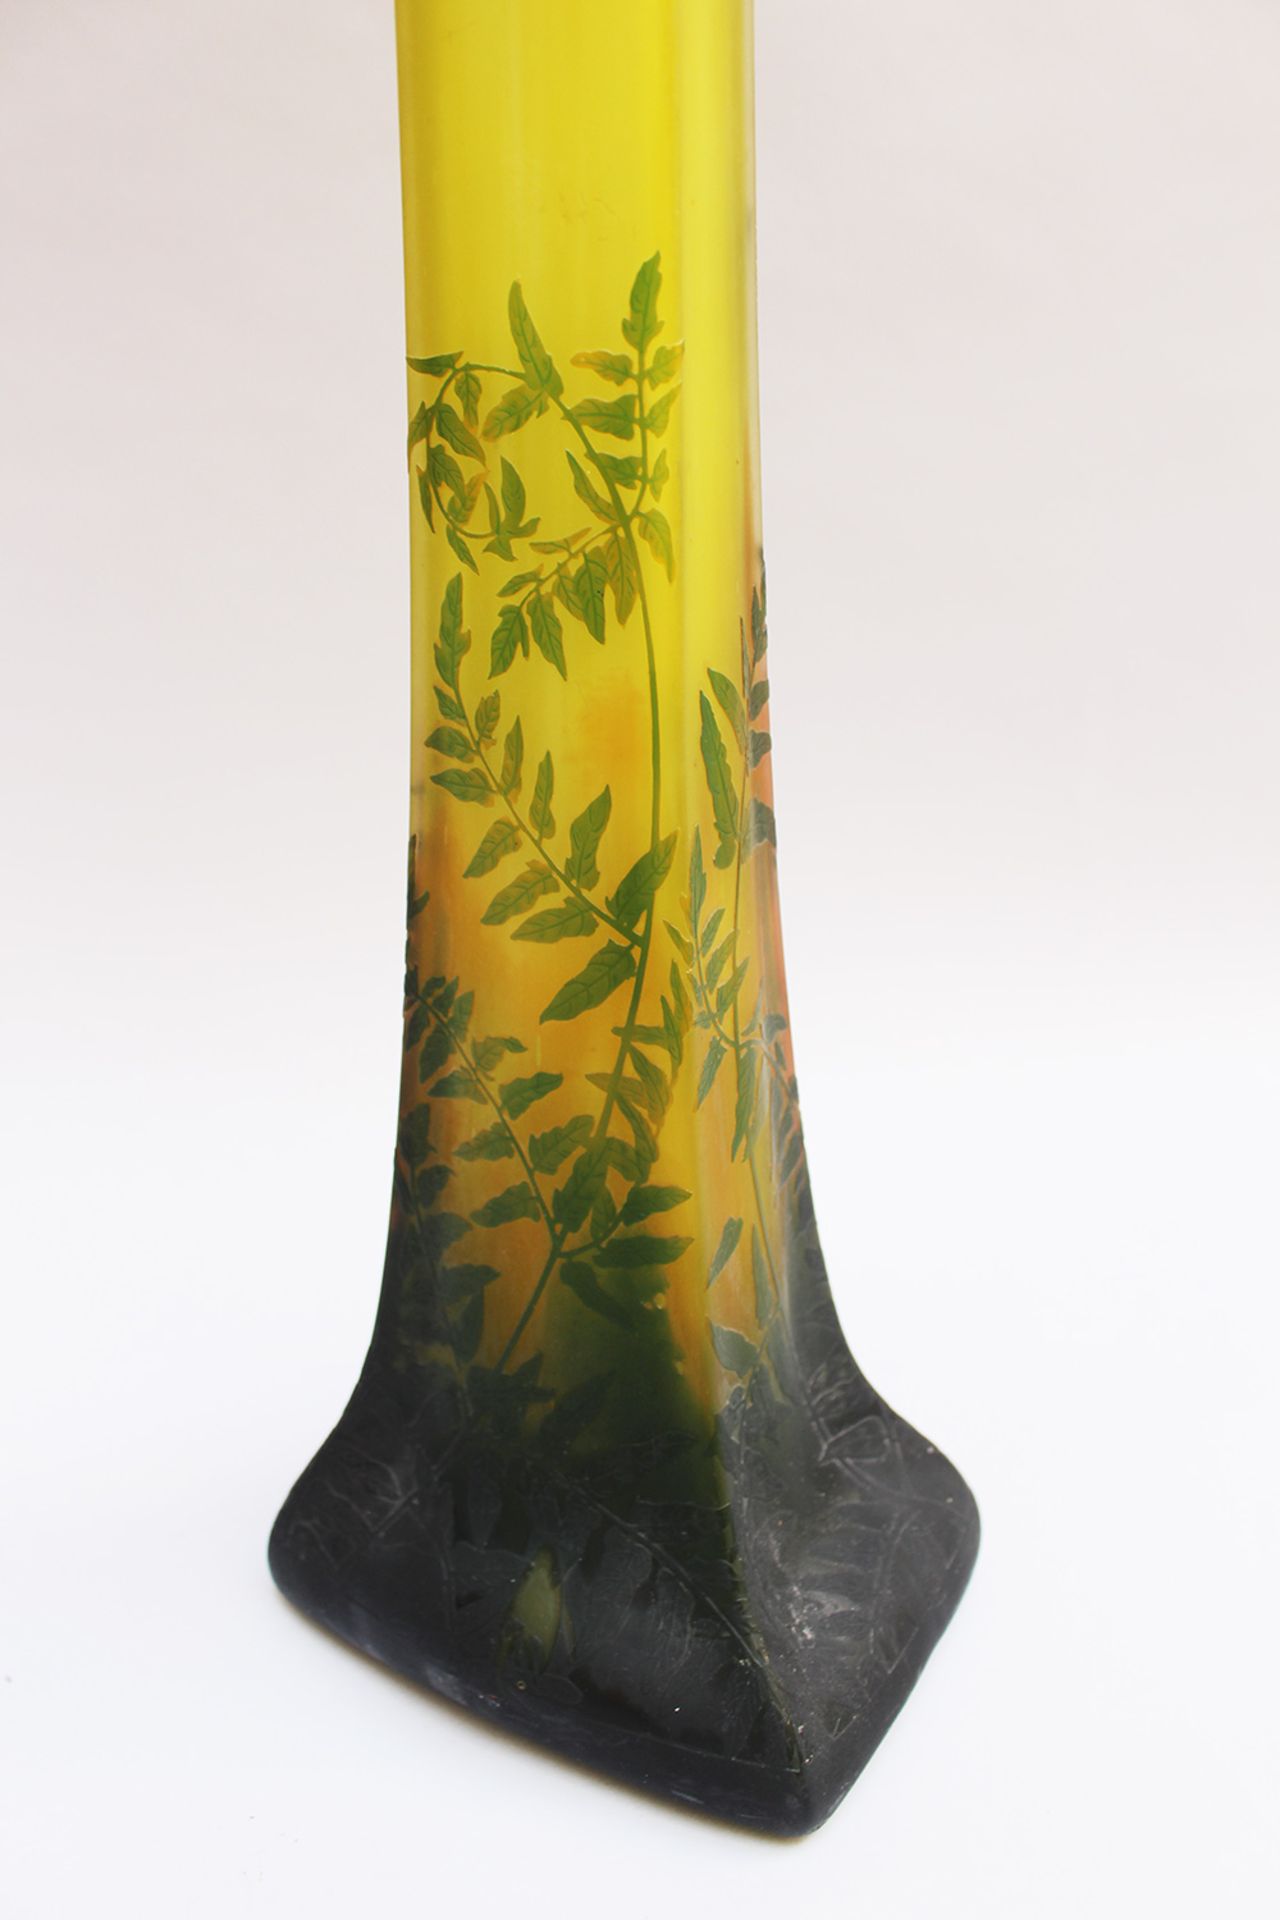 Daum (1890-1919) Nancy, Large glass Vase with long neck on shaped rectangular base green glass with  - Bild 3 aus 3